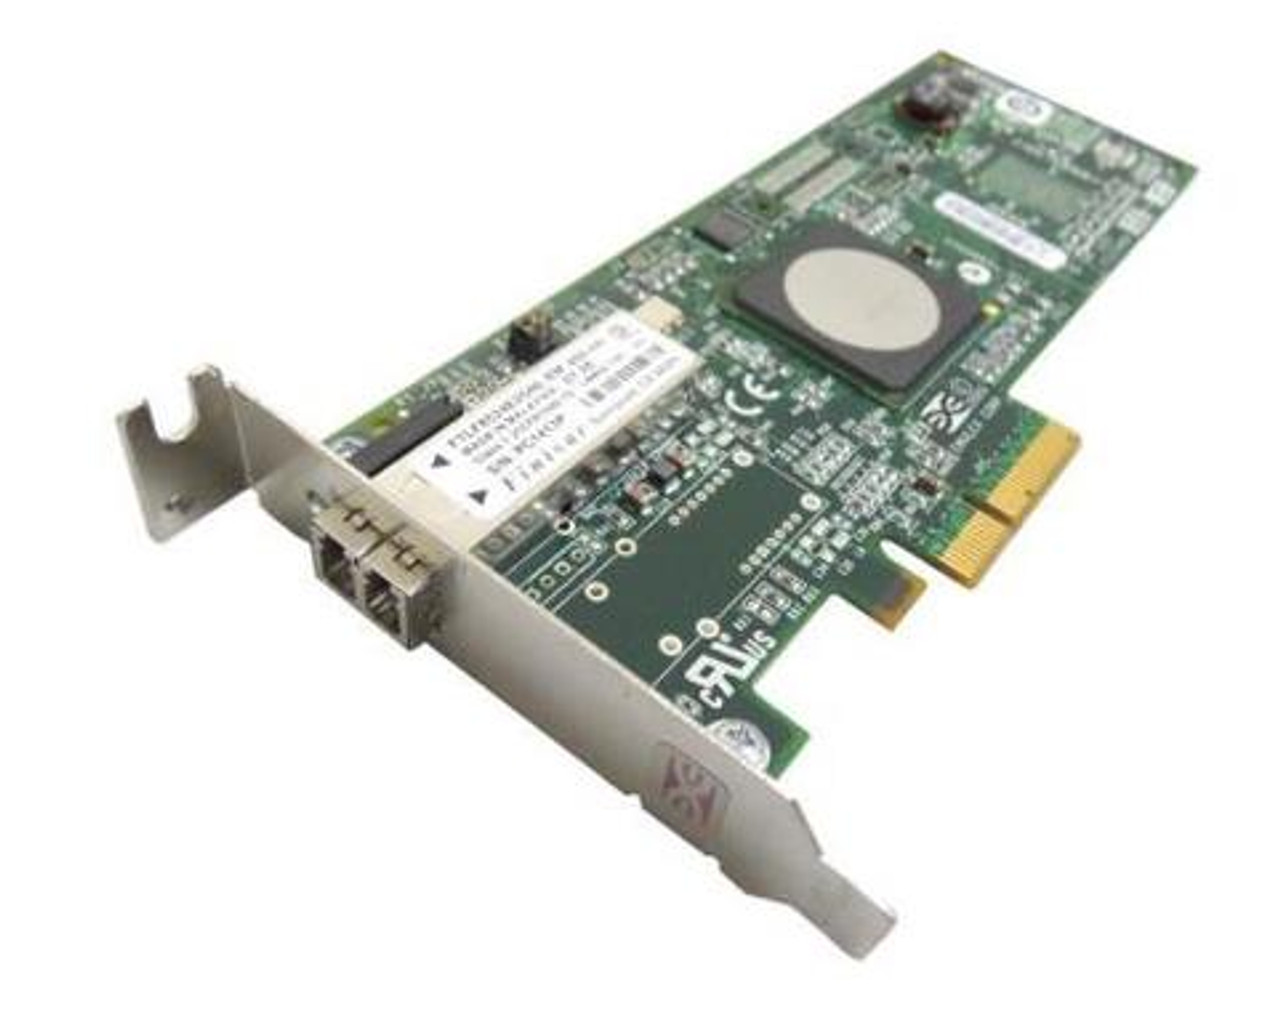 43W7510-B1-06 IBM Single-Port 4Gbps Fibre Channel PCI Express Host Bus Network Adapter by Emulex for System x